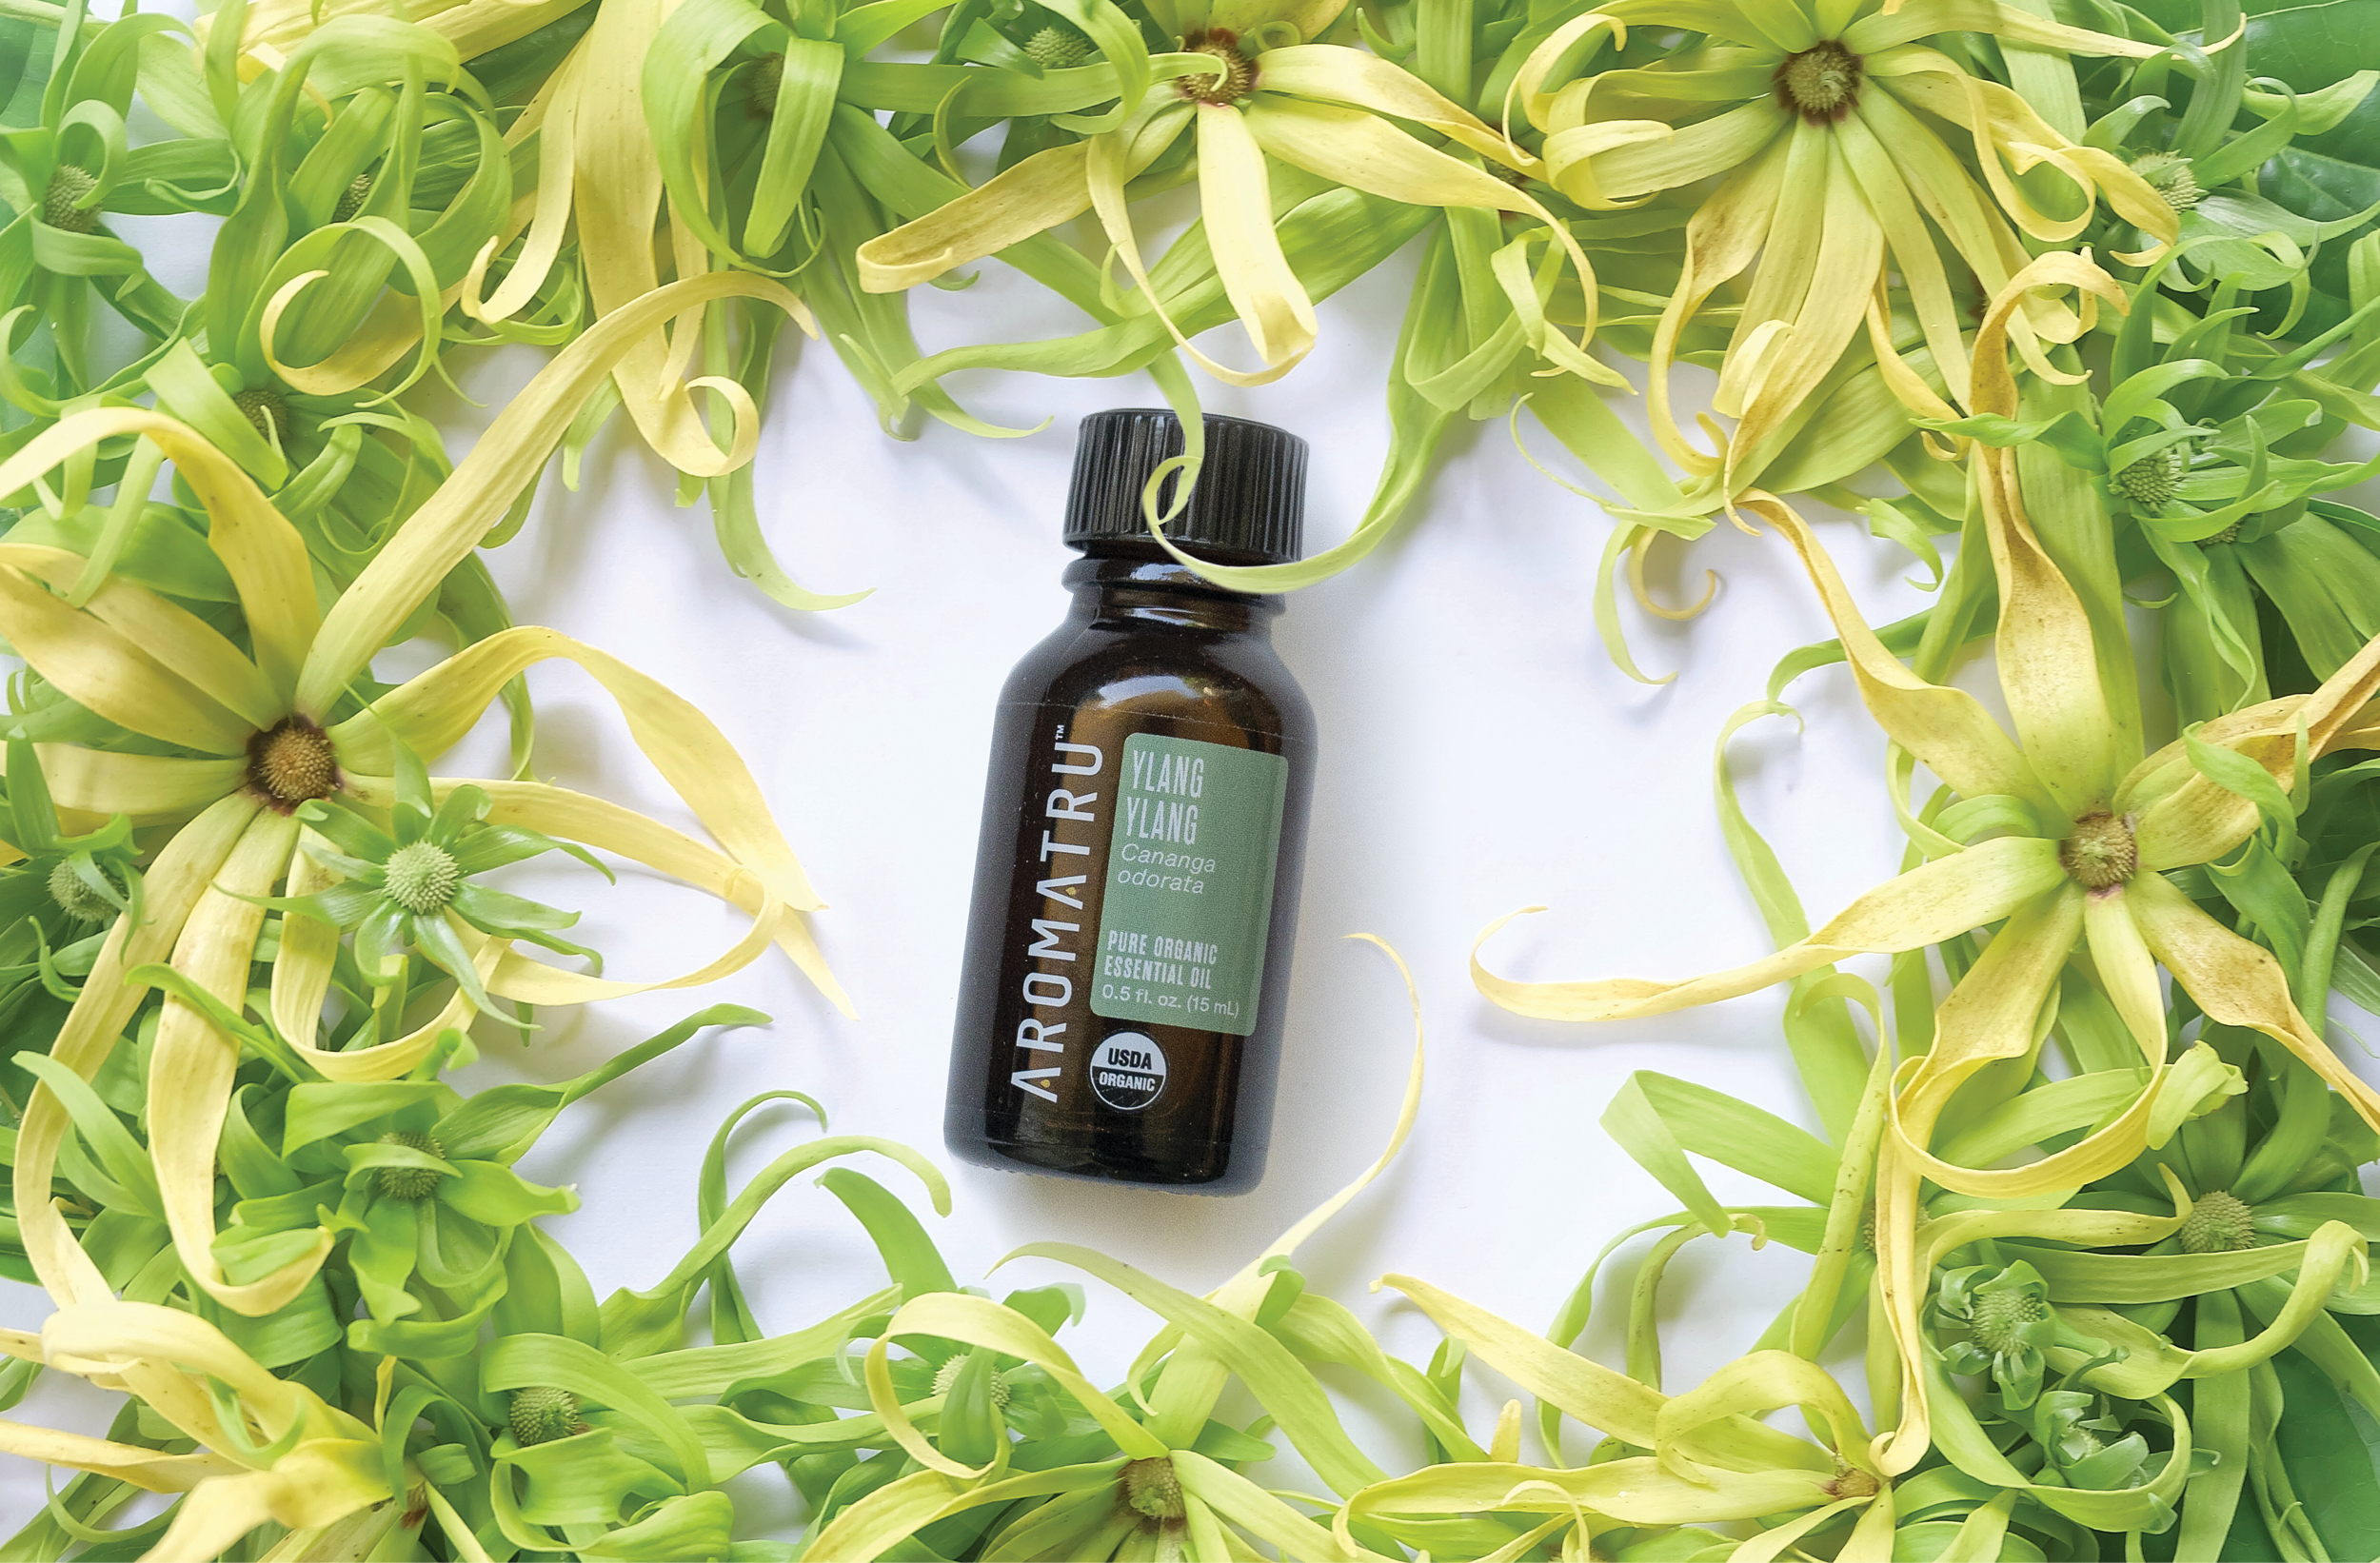 Transport Yourself with Ylang Ylang Essential Oil